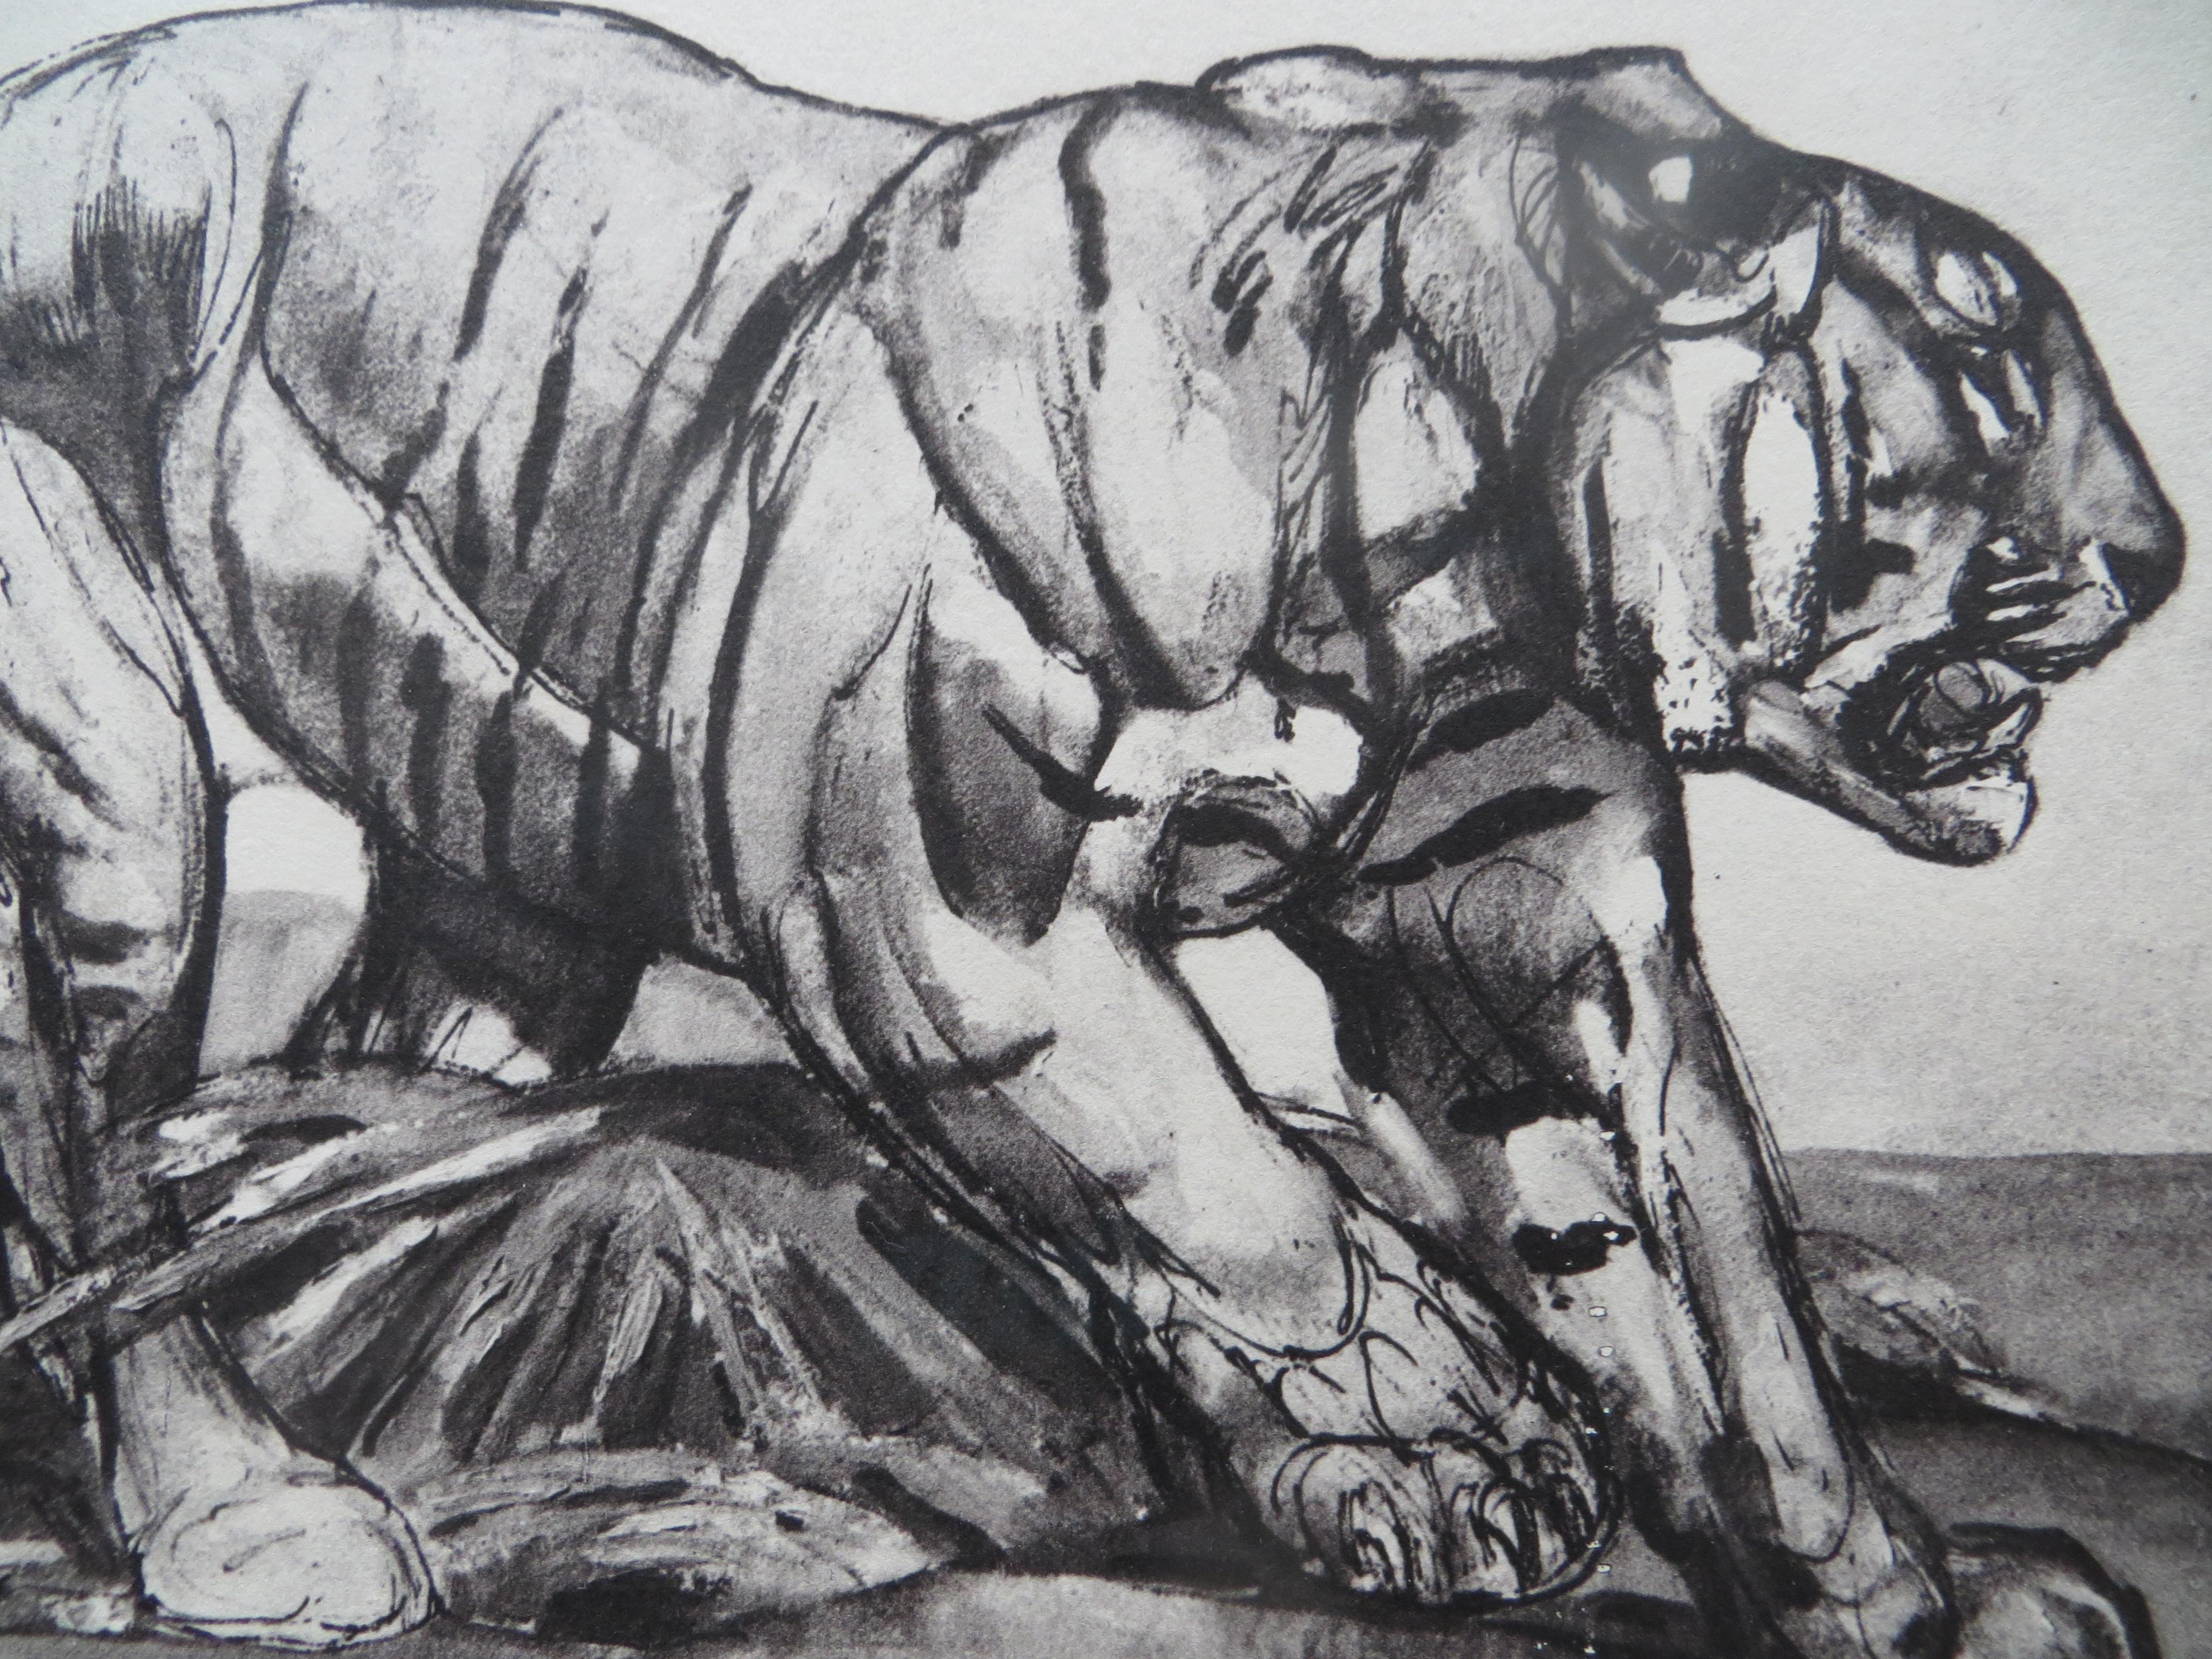 LIthograph by Paul Jouve c.1948 depicting a walking tiger. 
Beautiful custom frame with Museum anti-reflect glass and a black and white mat.
Excellent condition, has a signature and 1948 on the back
Paul Jouve was born March 16th, 1878 in